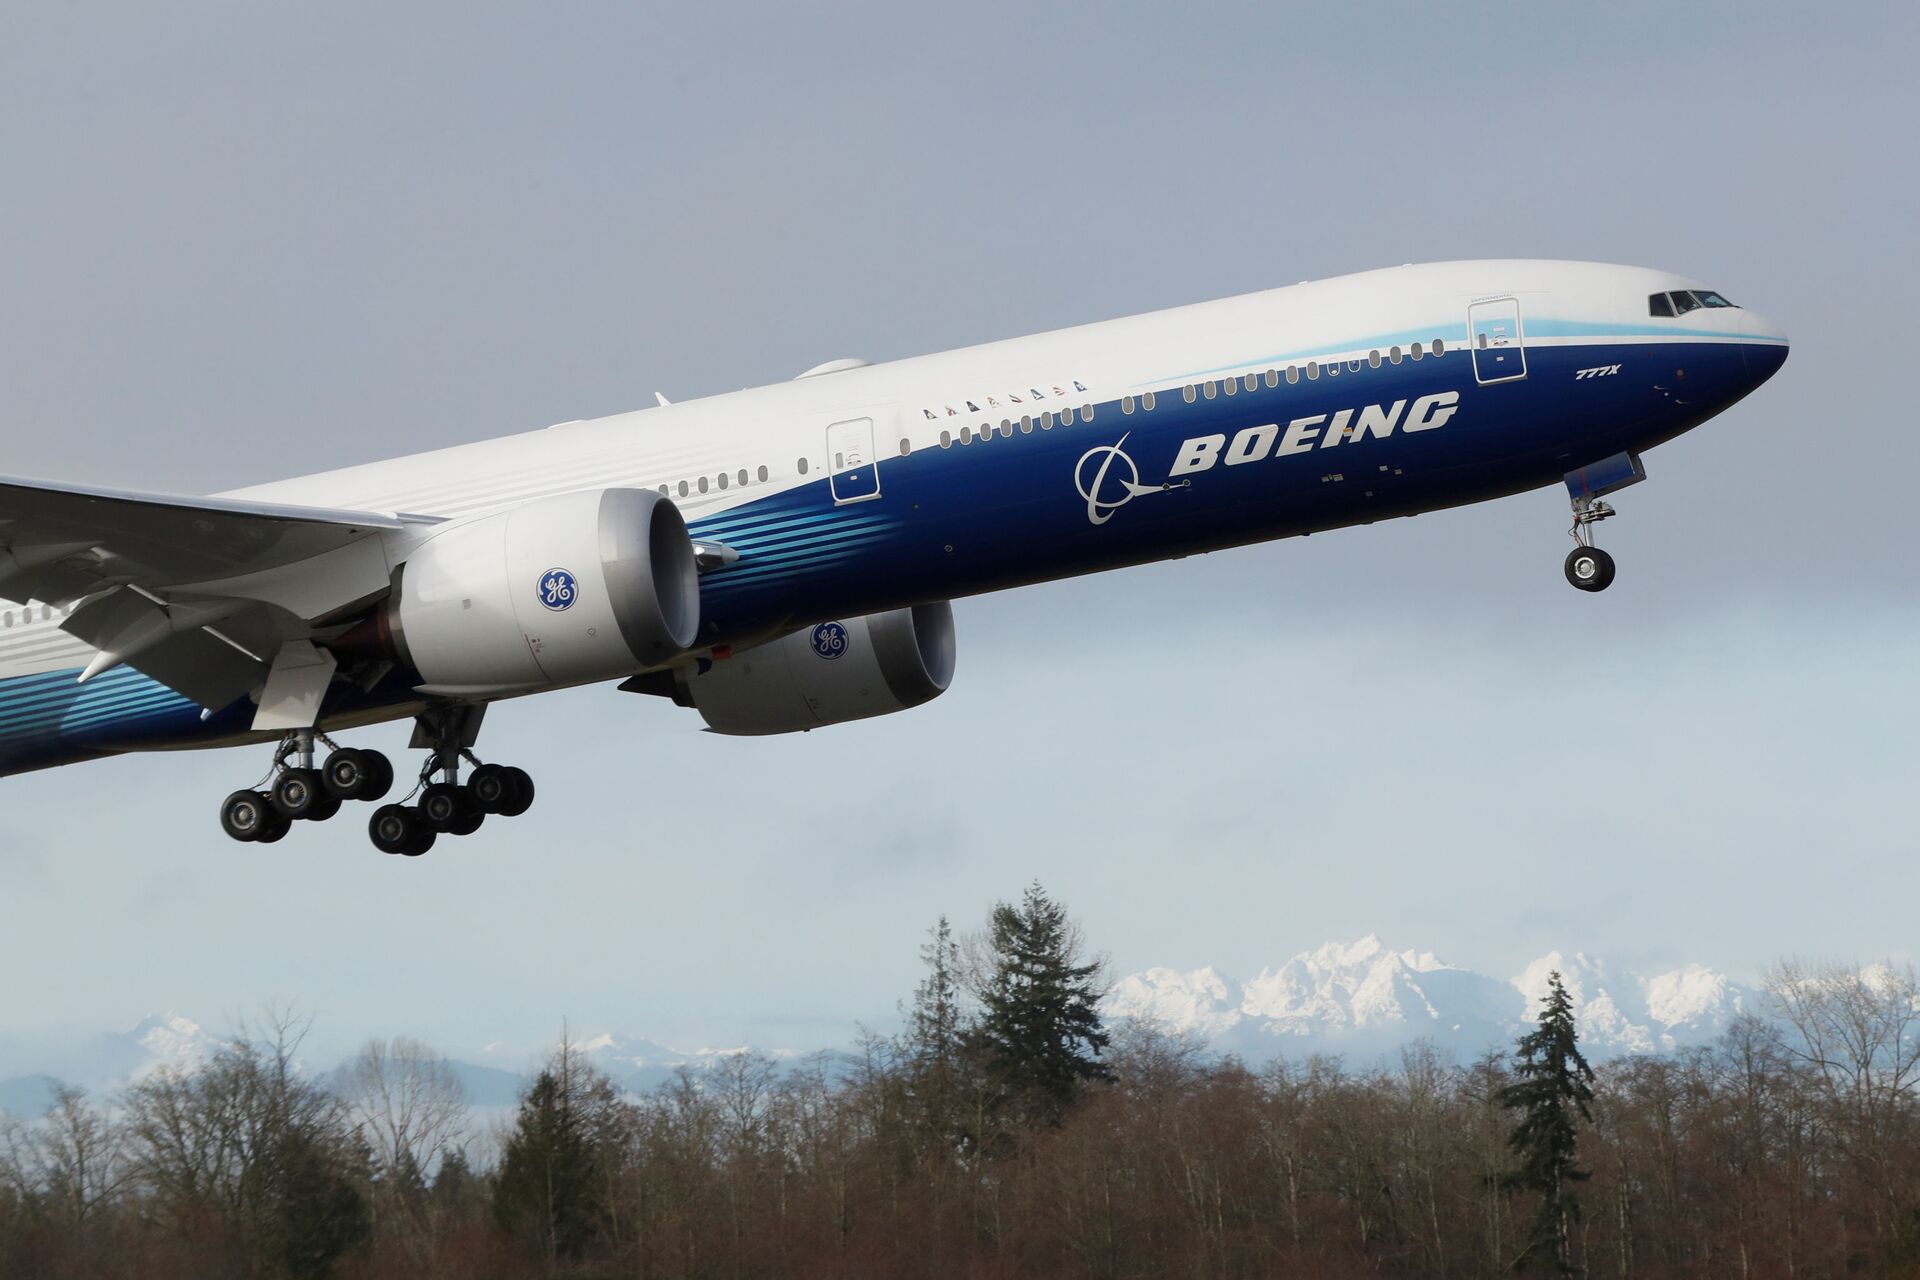 Boeing Recommends Suspending Operations of Its 777 Aircraft After Colorado Incident - Sputnik International, 1920, 22.02.2021